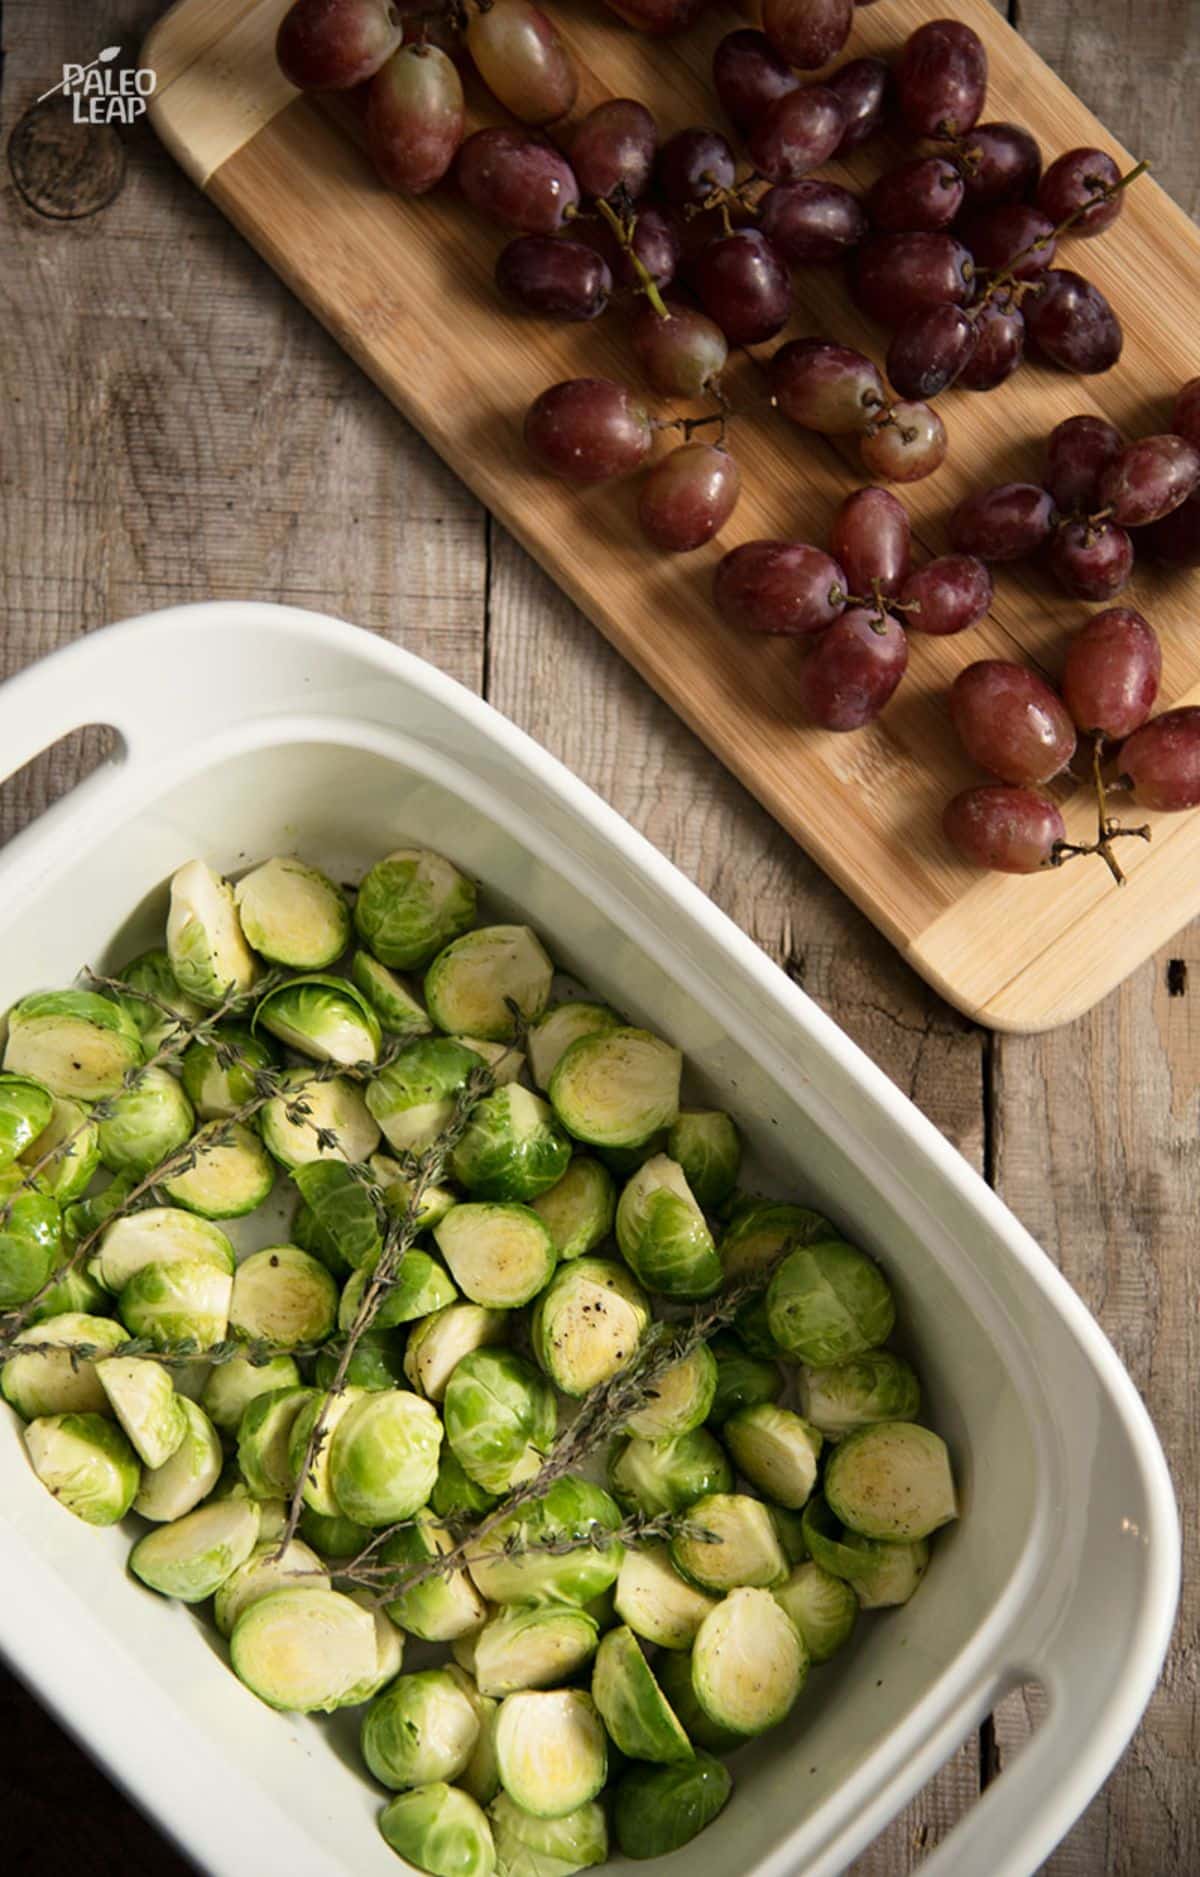 Roasted Brussels Sprouts with Grapes Recipe Preparation